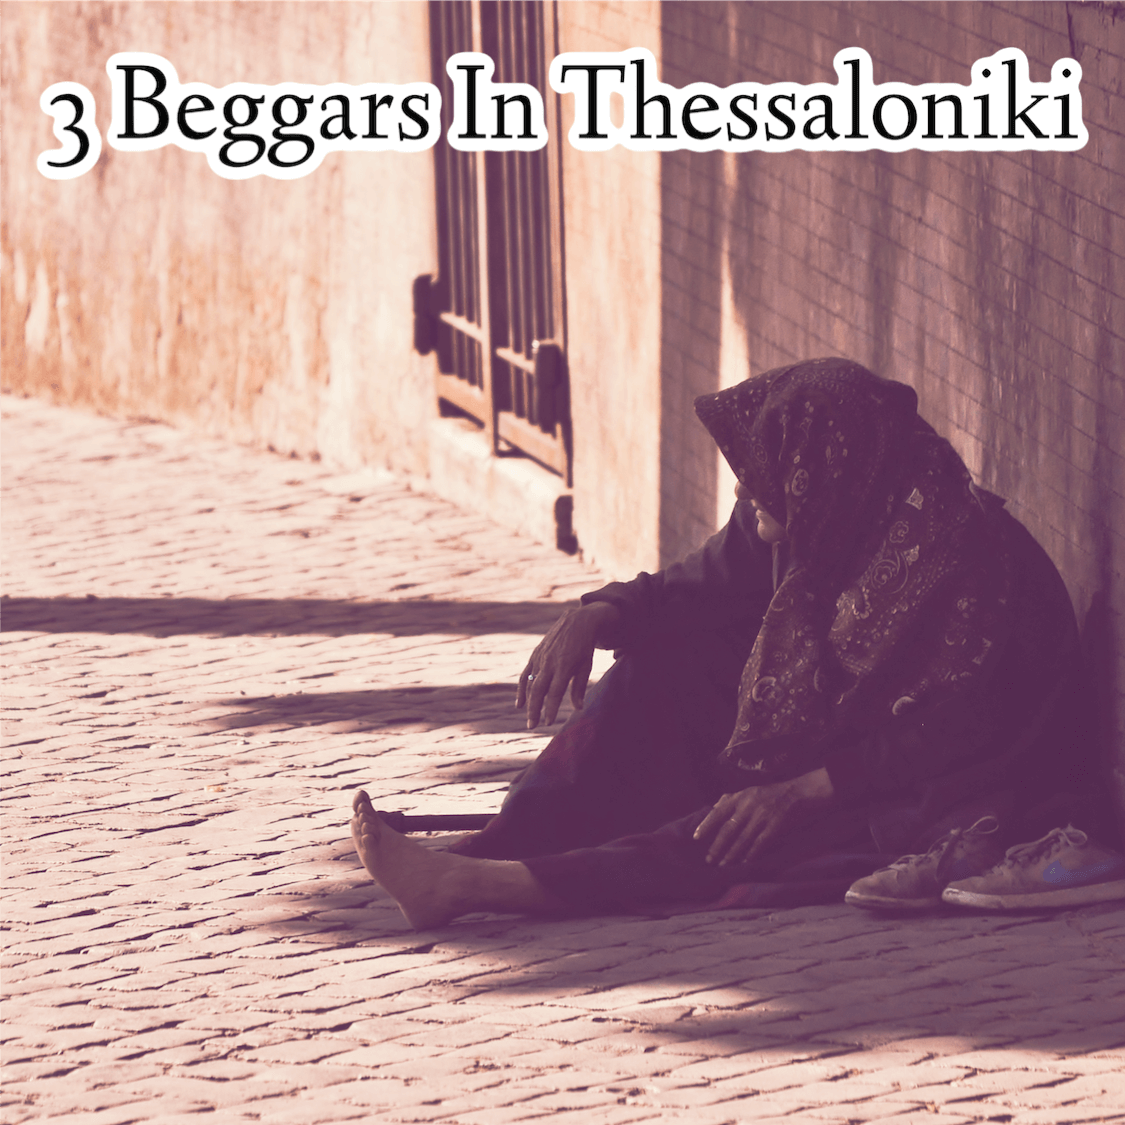 029: The story of 3 beggars in Thessaloniki